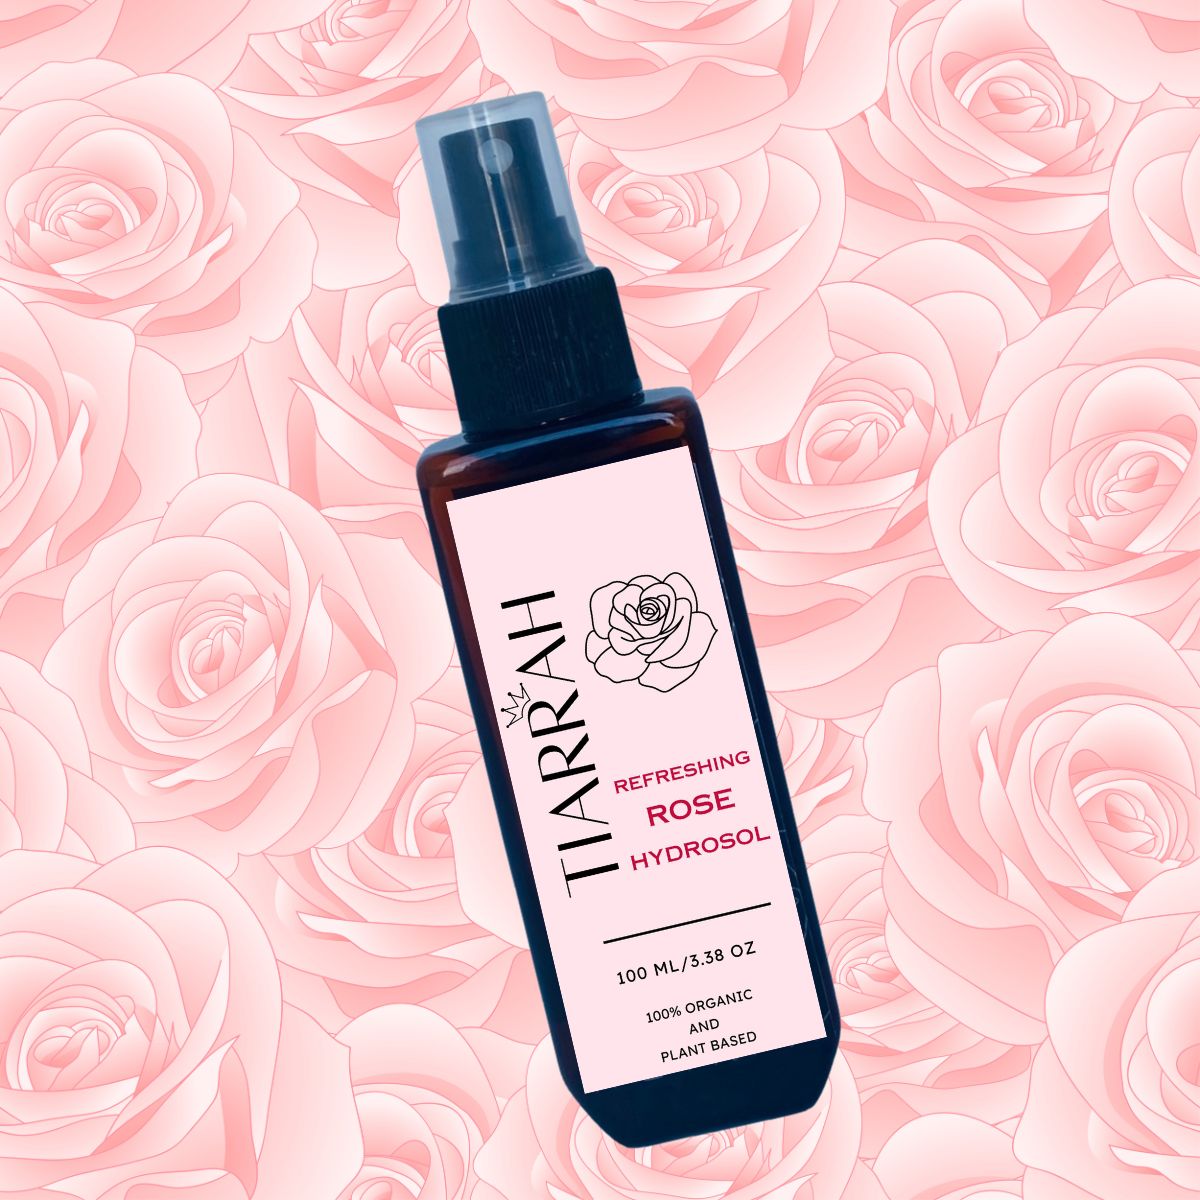 Luxury Refreshing Rose Hydrosol by Tiarrah: Organic, Non-Toxic - The Luxury Bath and Body Care Shop